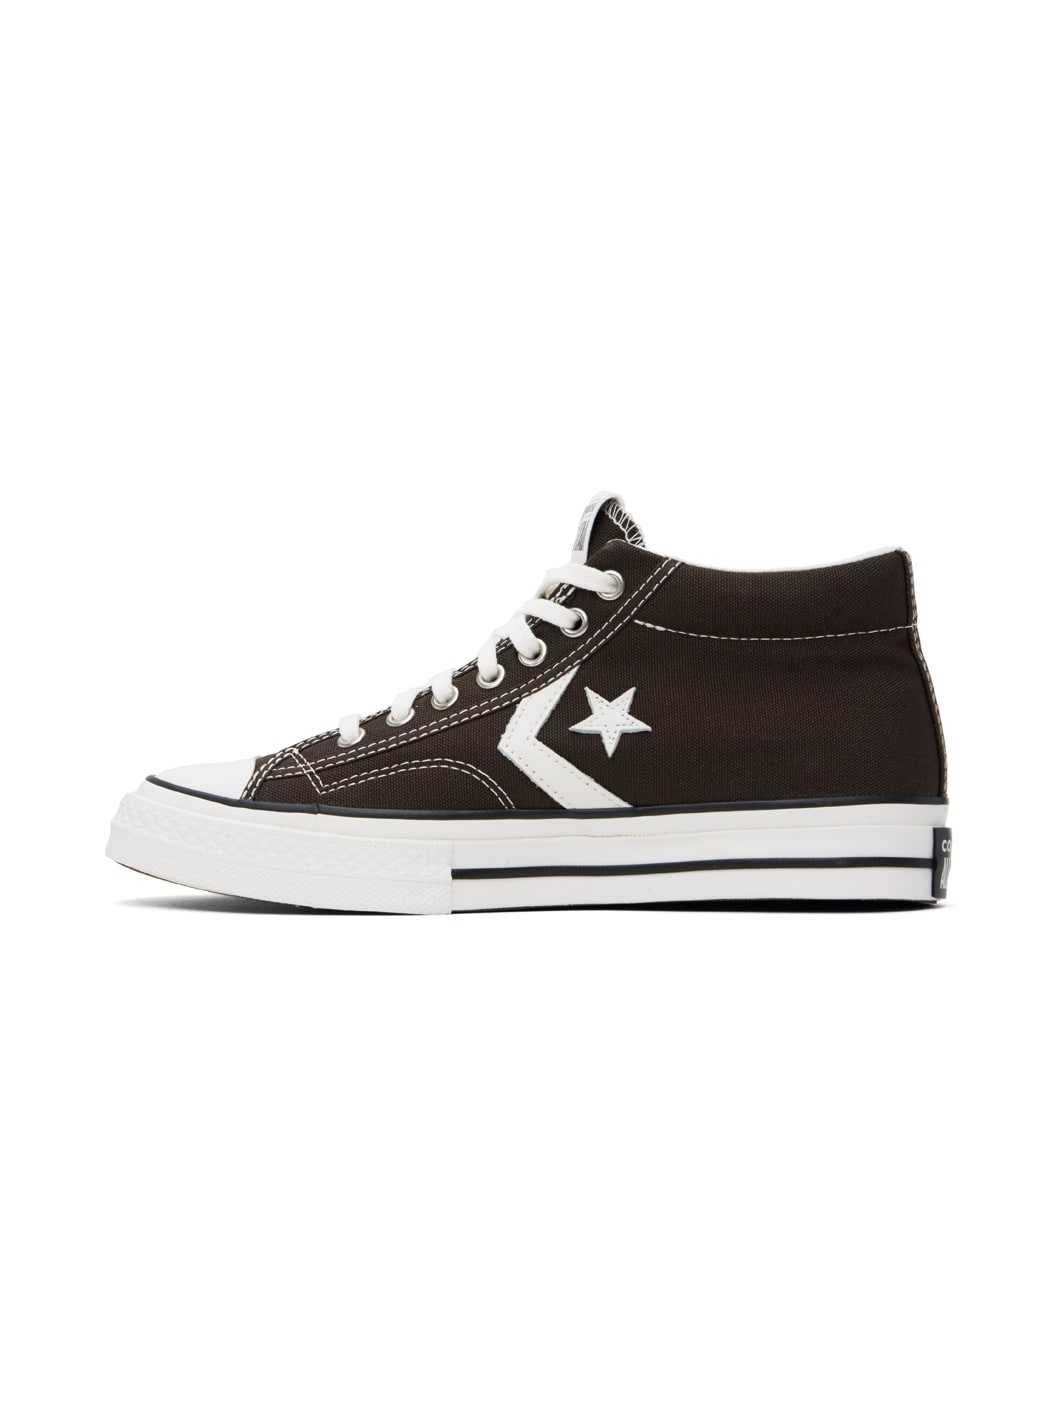 Brown Star Player 76 Mid Top Sneakers - 3